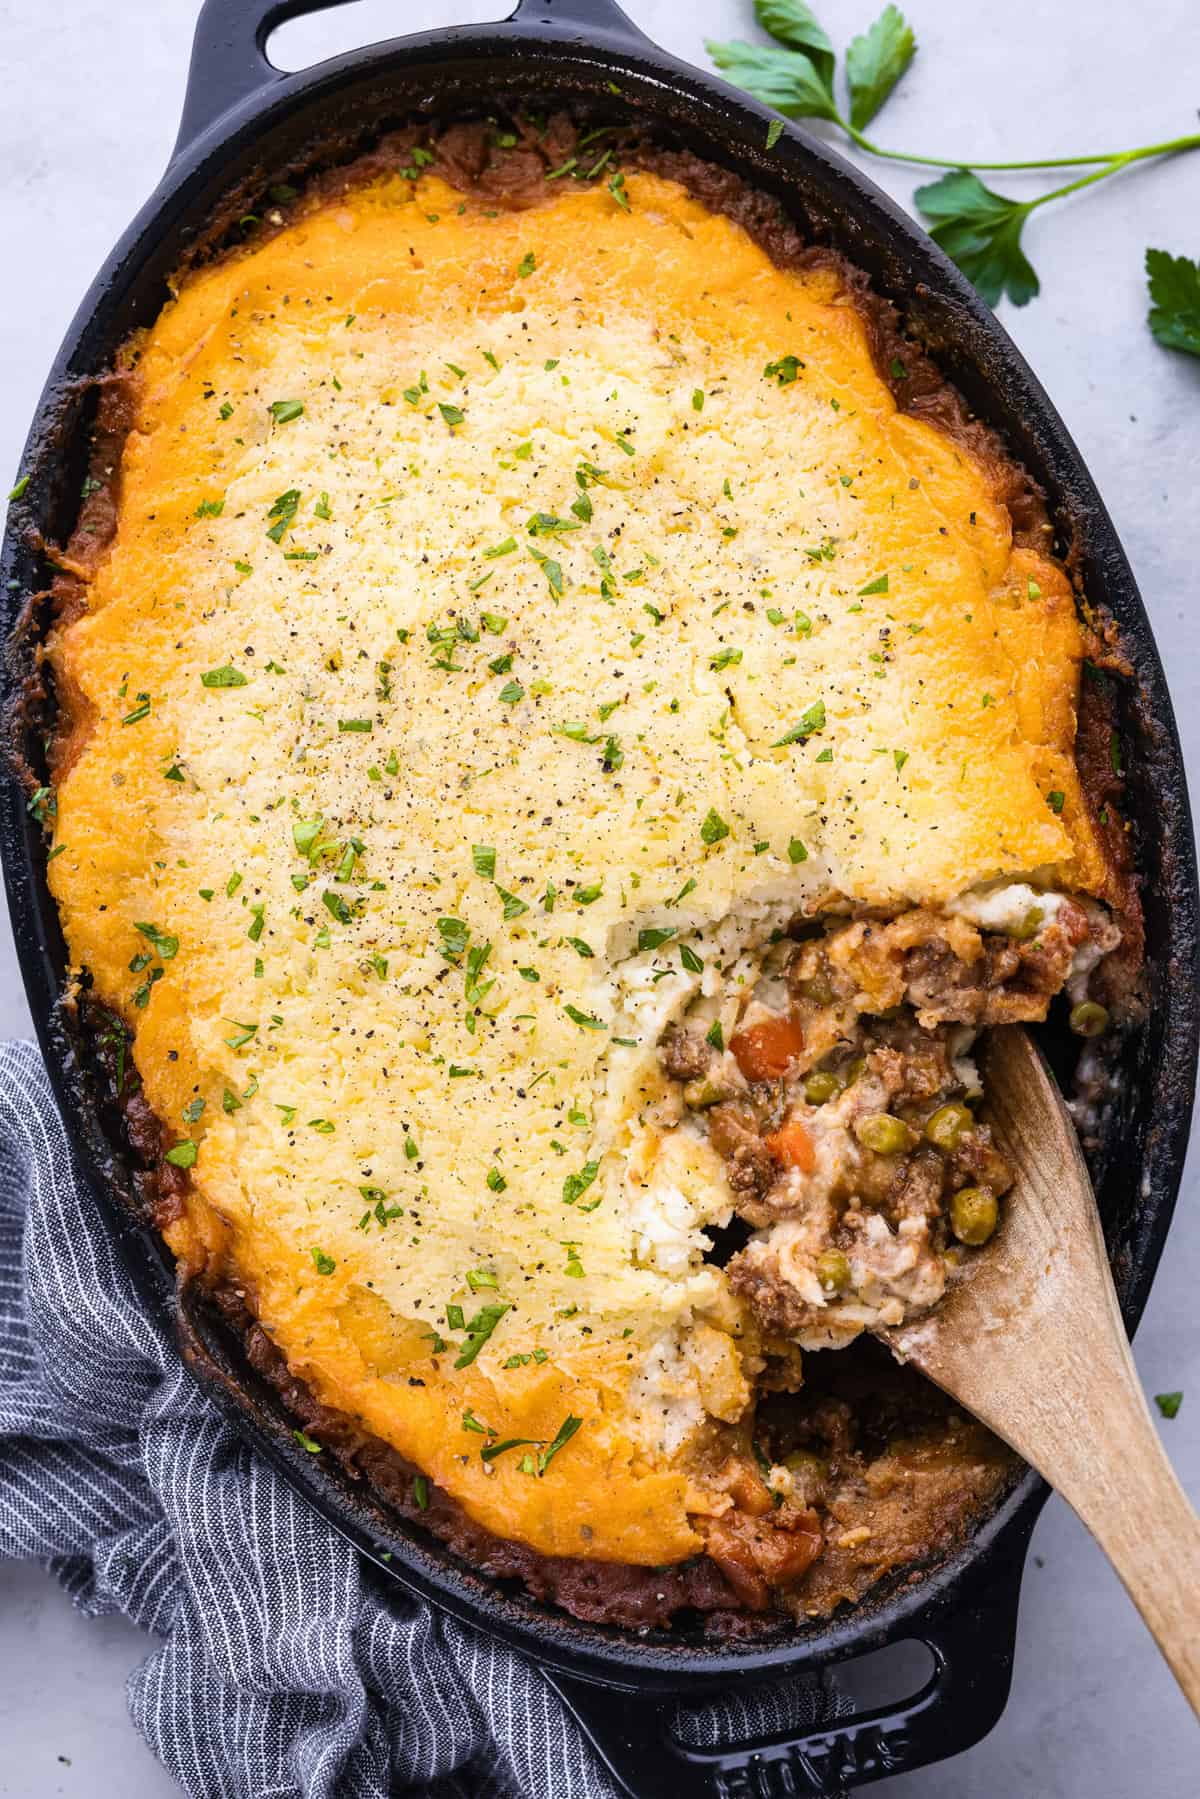 A shepherd's pie in a cast iron skillet, topped with golden-brown mashed potatoes, sprinkled with herbs. Perfect for busy families, a wooden spoon scoops into the pie, revealing the meat